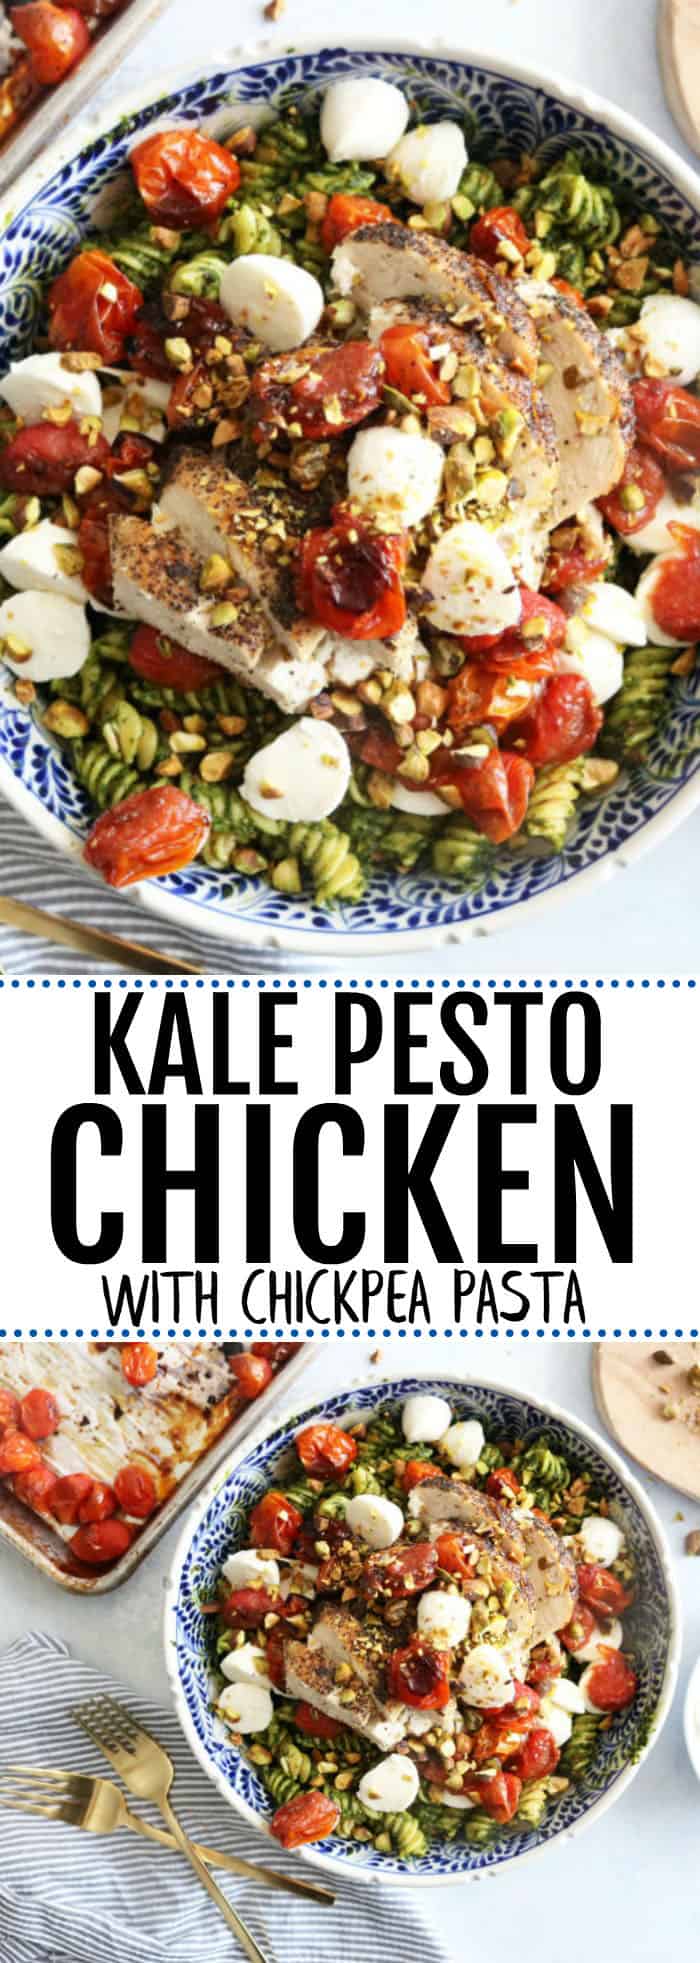 Really delicious recipe for kale pesto chicken with chickpea pasta. It's low carb, gluten free, and perfect for meal prep or easy weeknight dinners! thetoastedpinenut.com #glutenfree #healthymeal #weeknightmeal #familymeal